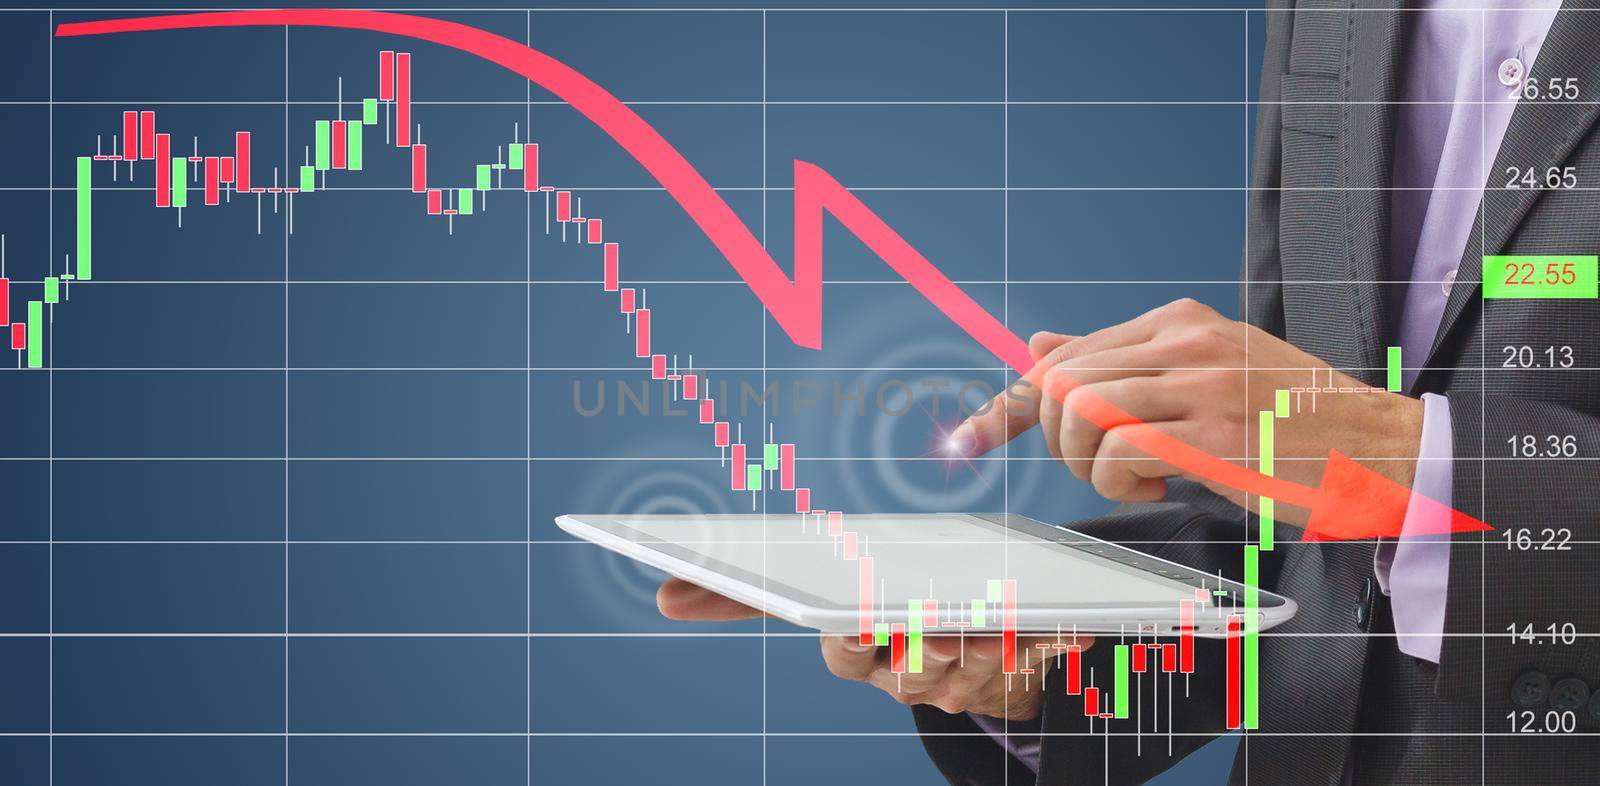 Office man finger touch hud, virtual screen with stock market changes, business candlesticks graph chart. Double exposure of lines, growing numbers, online trading.